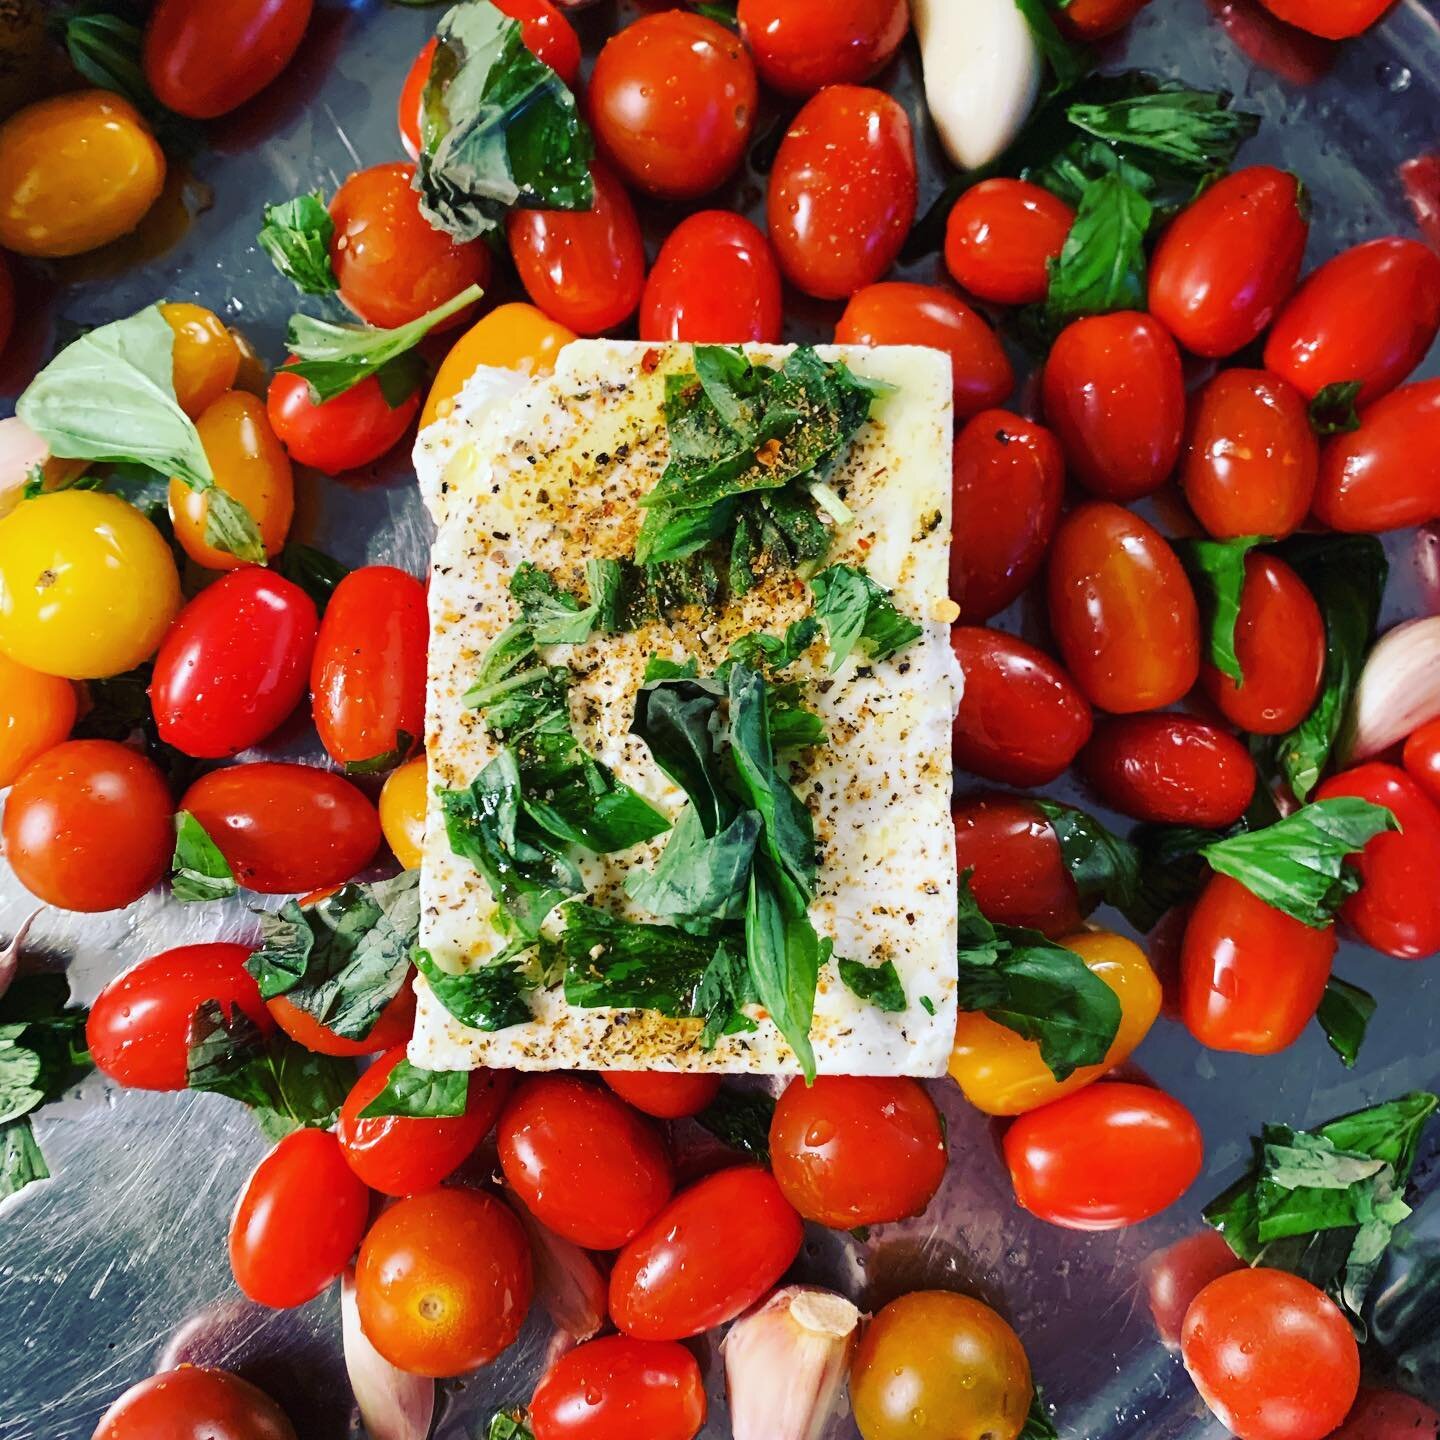 I saw this in an insta video a while back and suddenly remembered it, so decided to make it for dinner tonight. If you want something quick and delicious - and ridiculously easy - this is the one. Feta roasted with loads of tomatoes, fresh basil, min